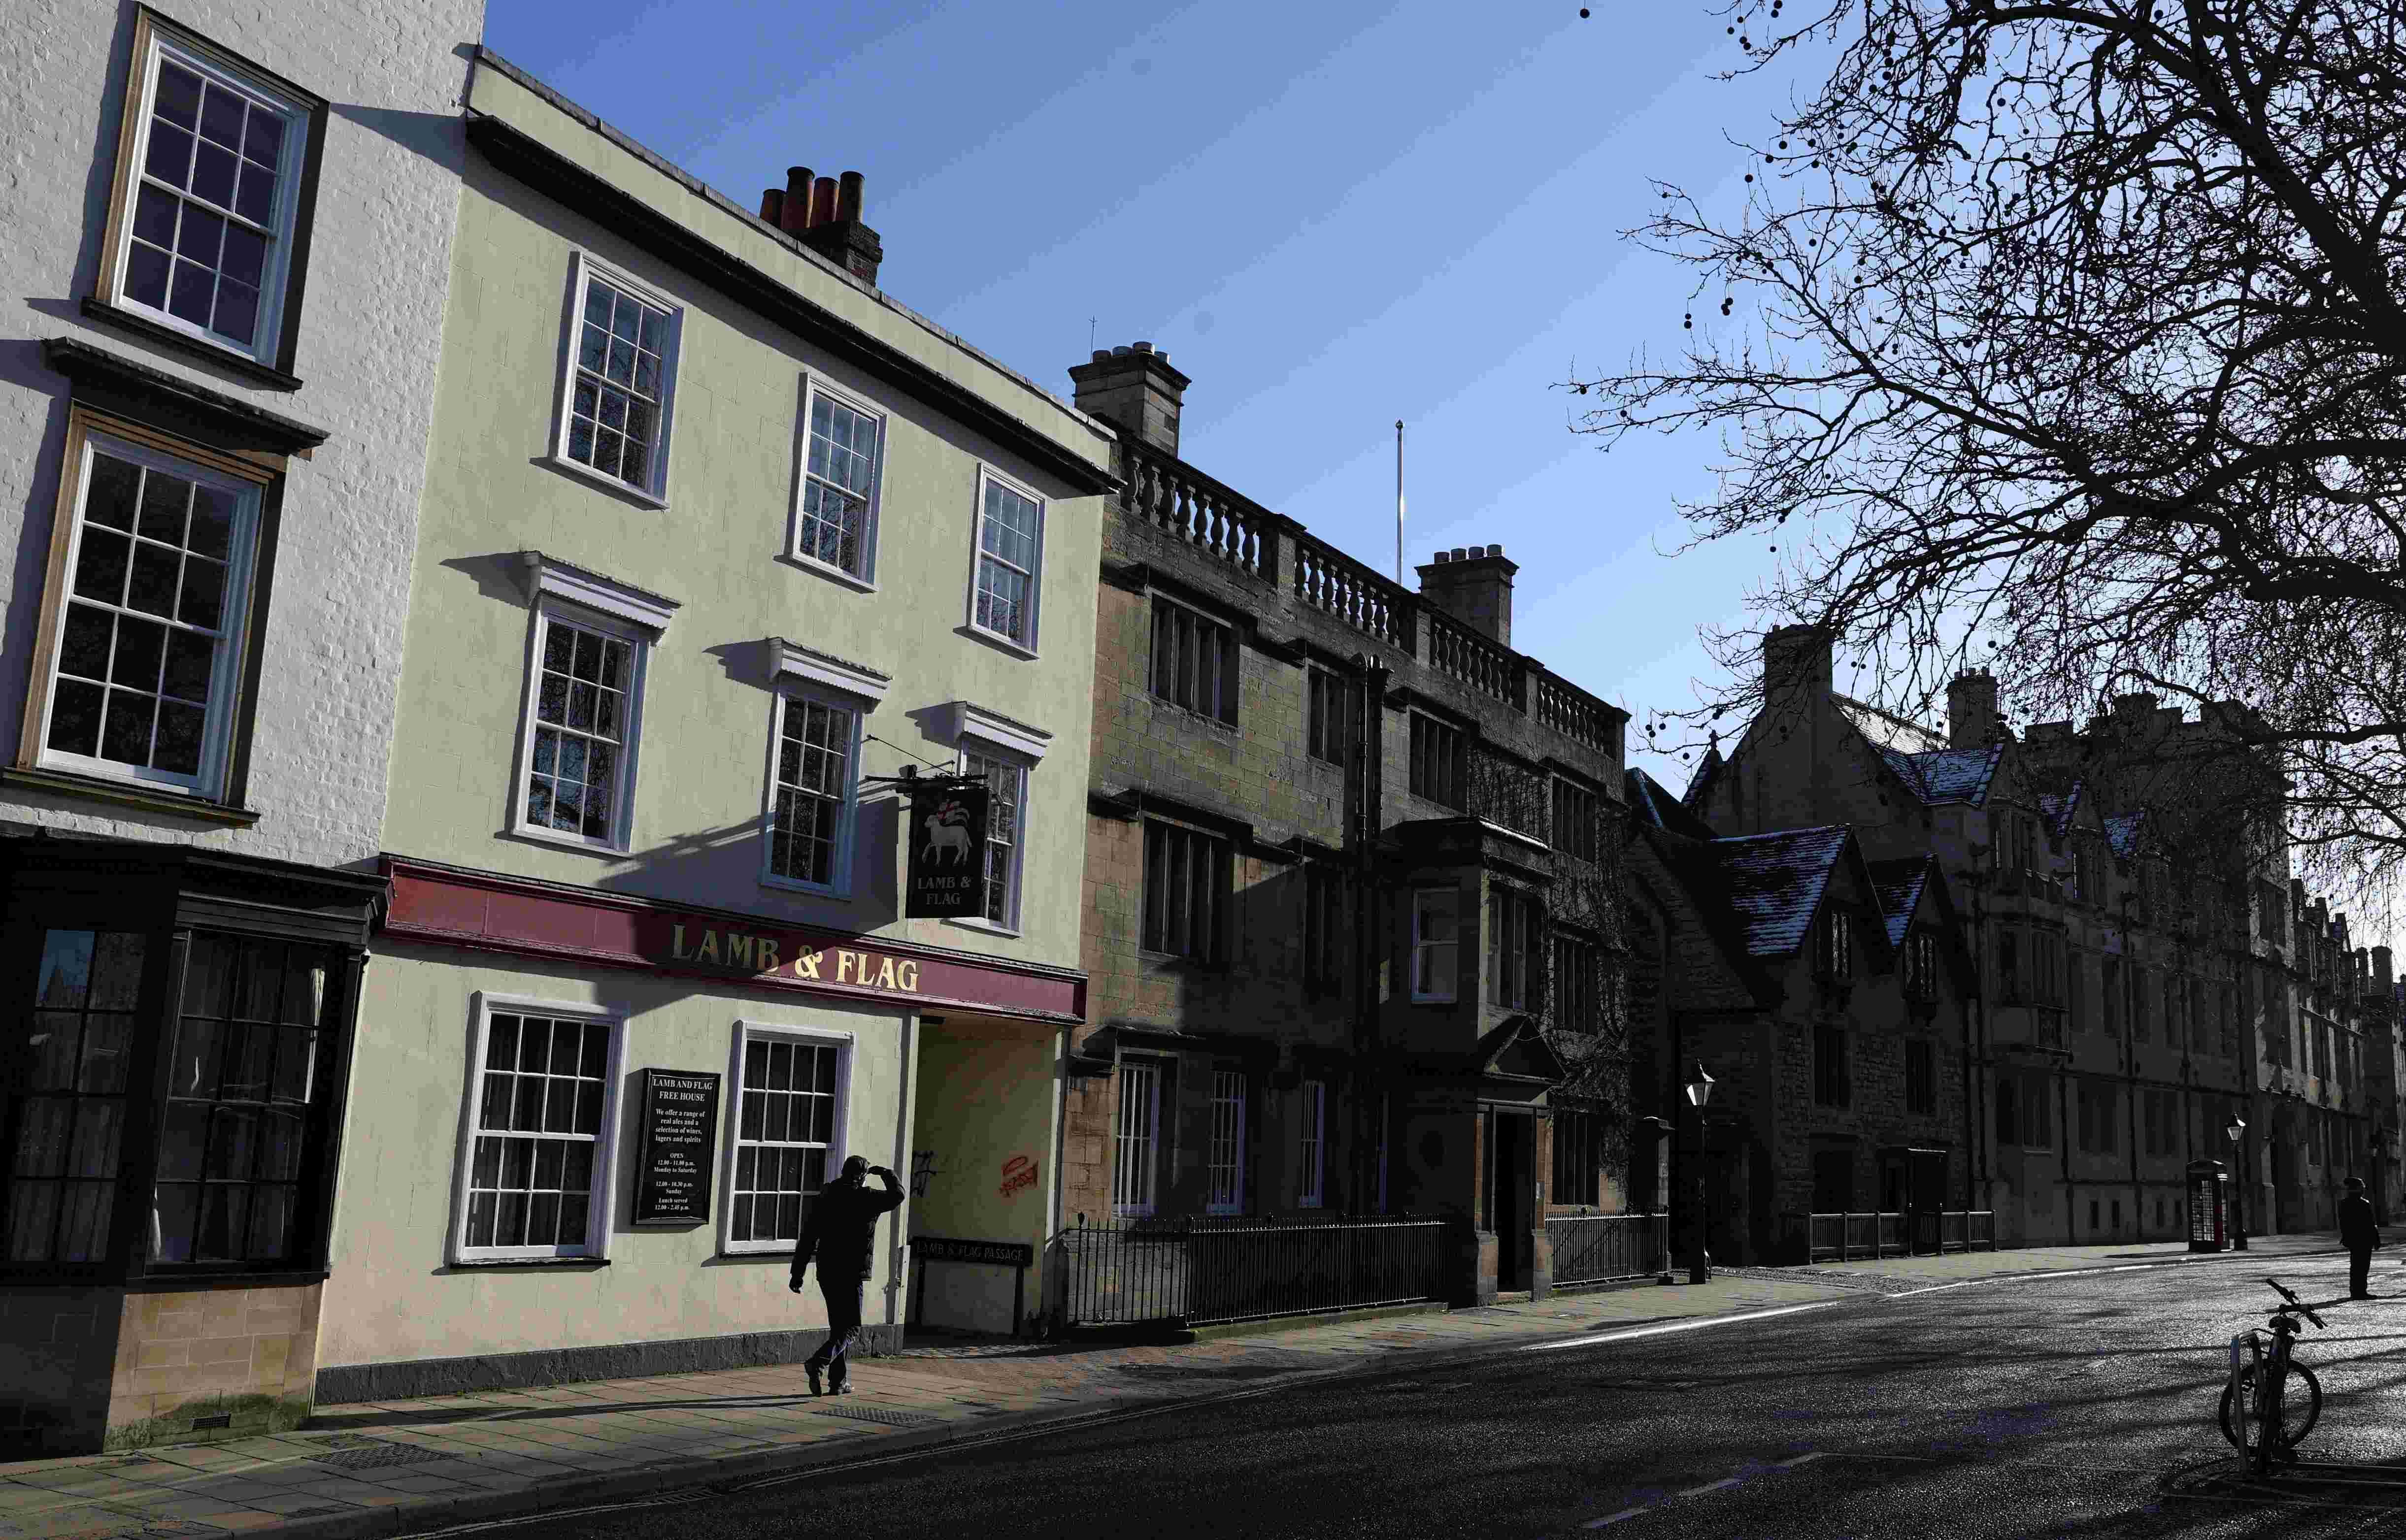 This 450-year-old Oxford pub shuts down due to COVID-19